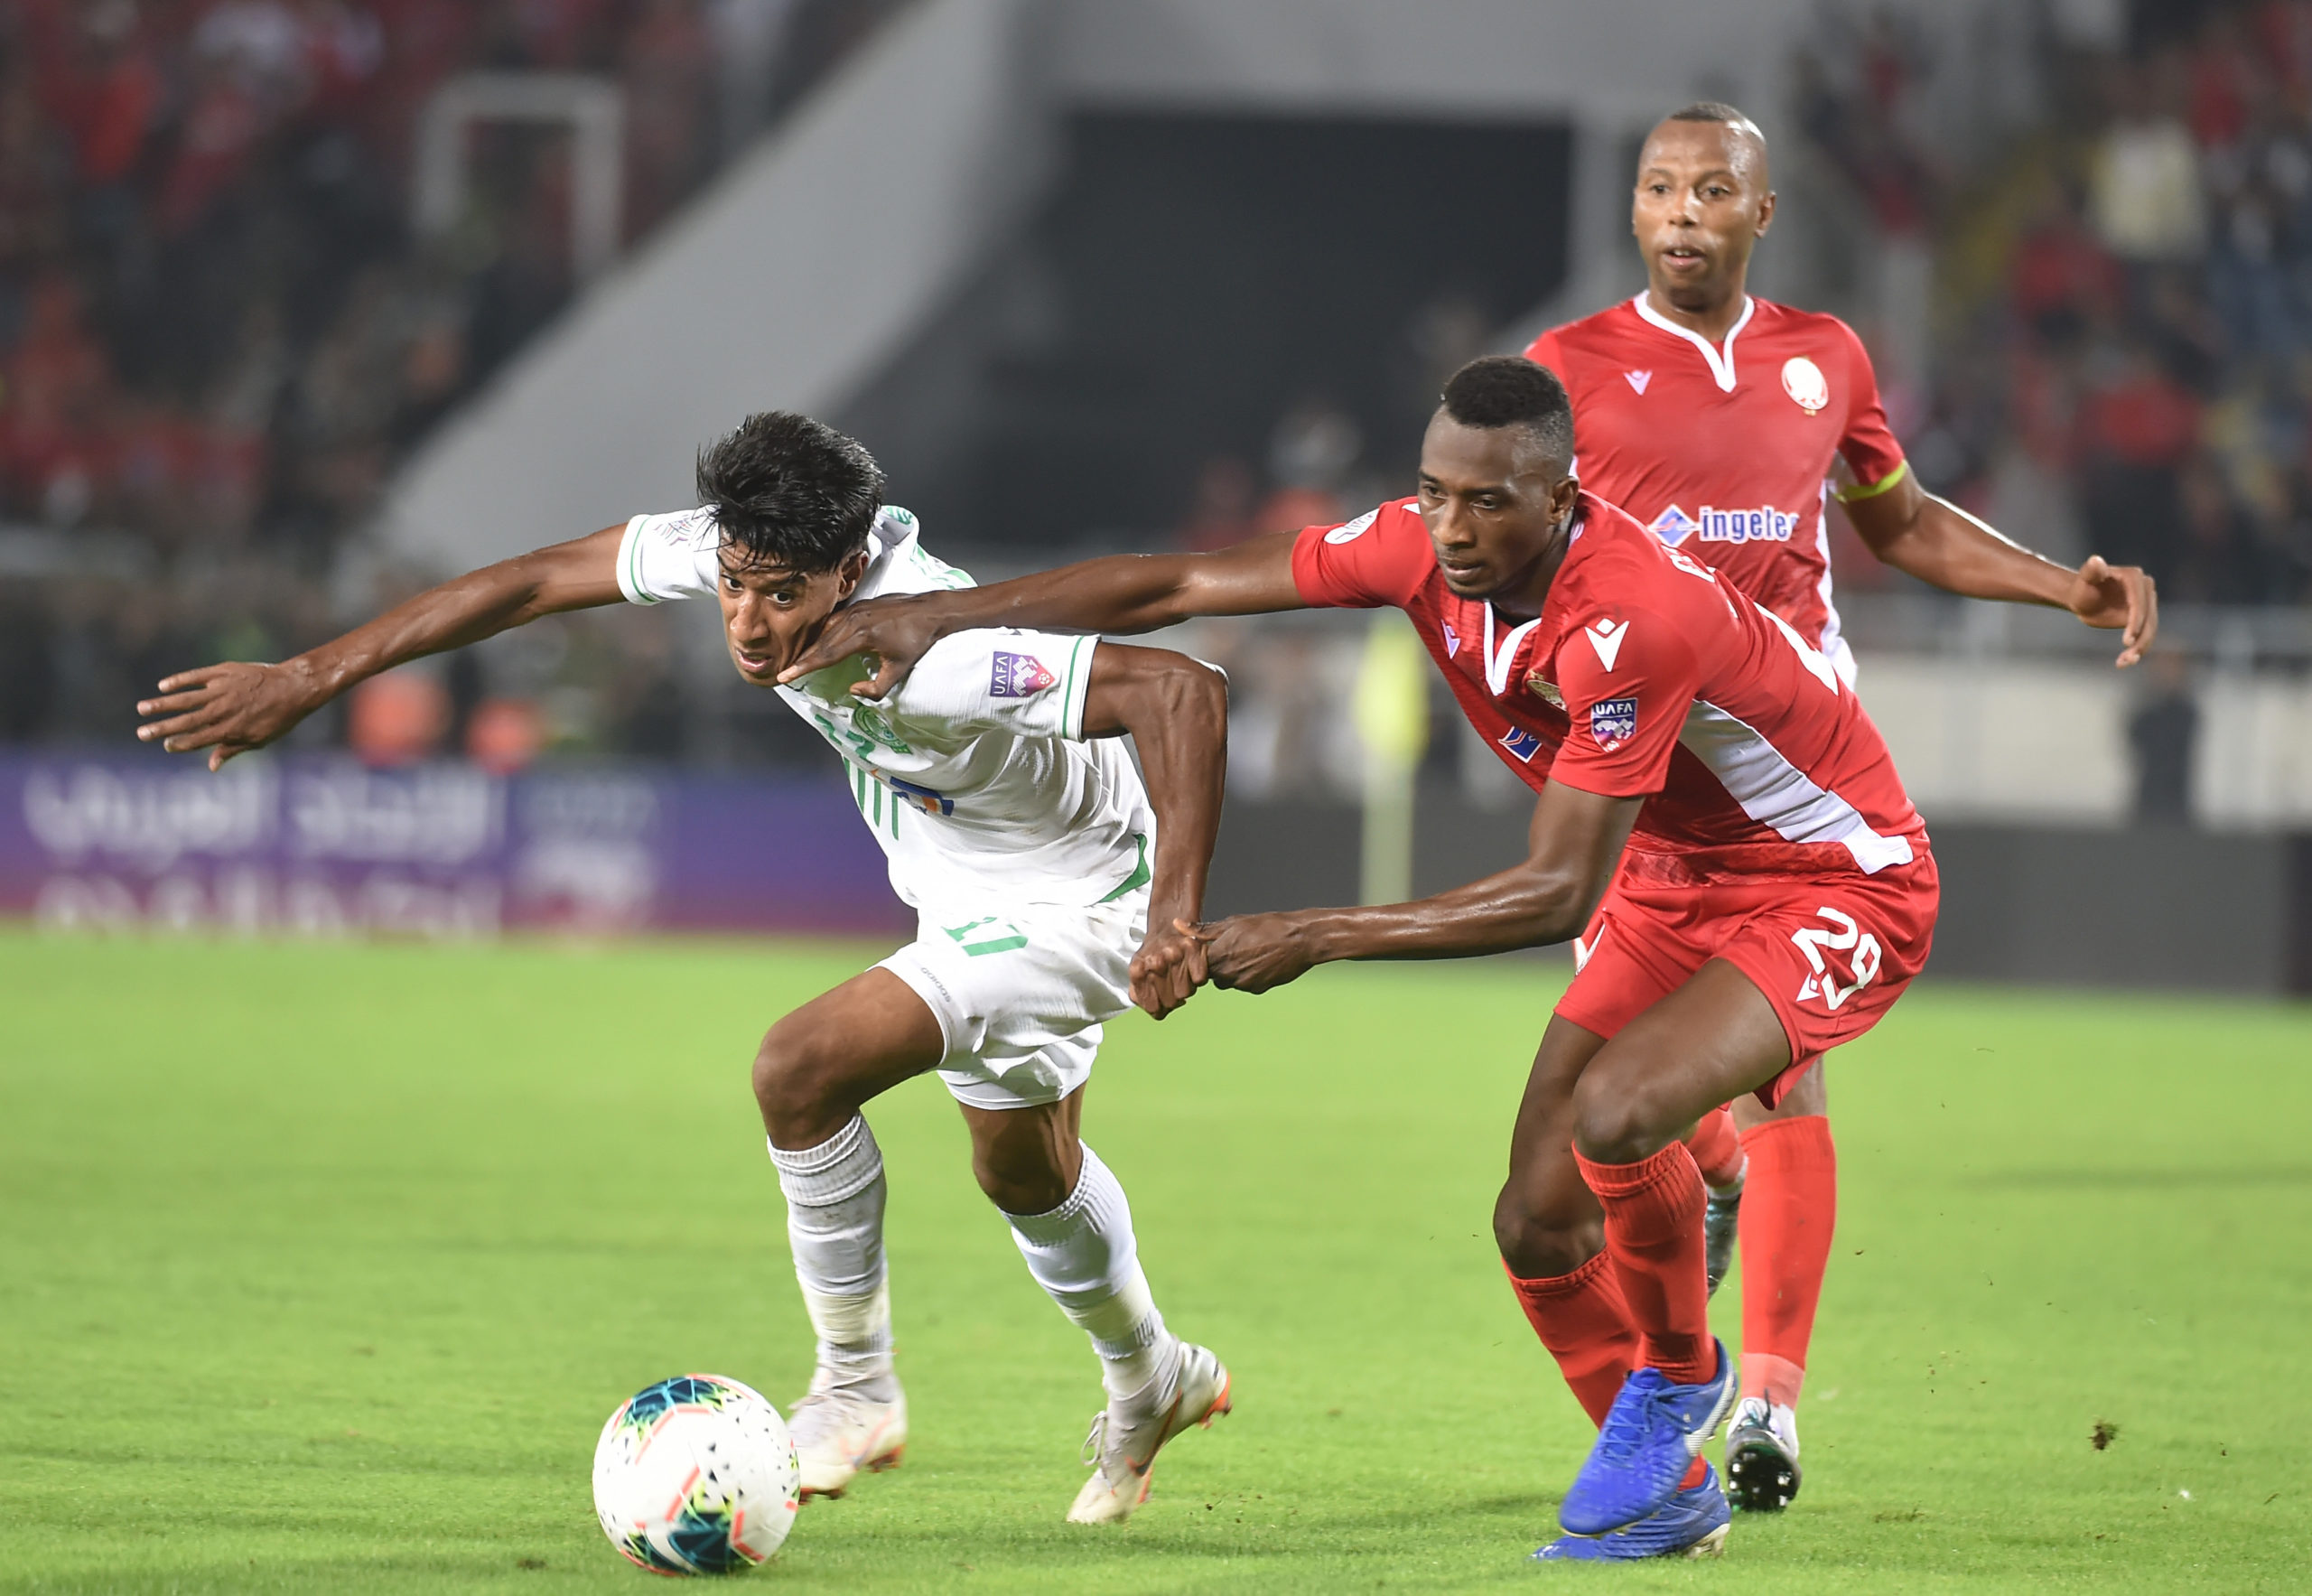 Wydad's Cheikh Ibrahim Komara (R) vies with Raja's Hamid Ahdad during the Mohammed VI Champion cup match between Morocco's Wydad Athletic Club and Morocco's Raja Club Atletic on November 2, 2019 in Casablanca. (Photo by STR / AFP) (Photo by STR/AFP via Getty Images)